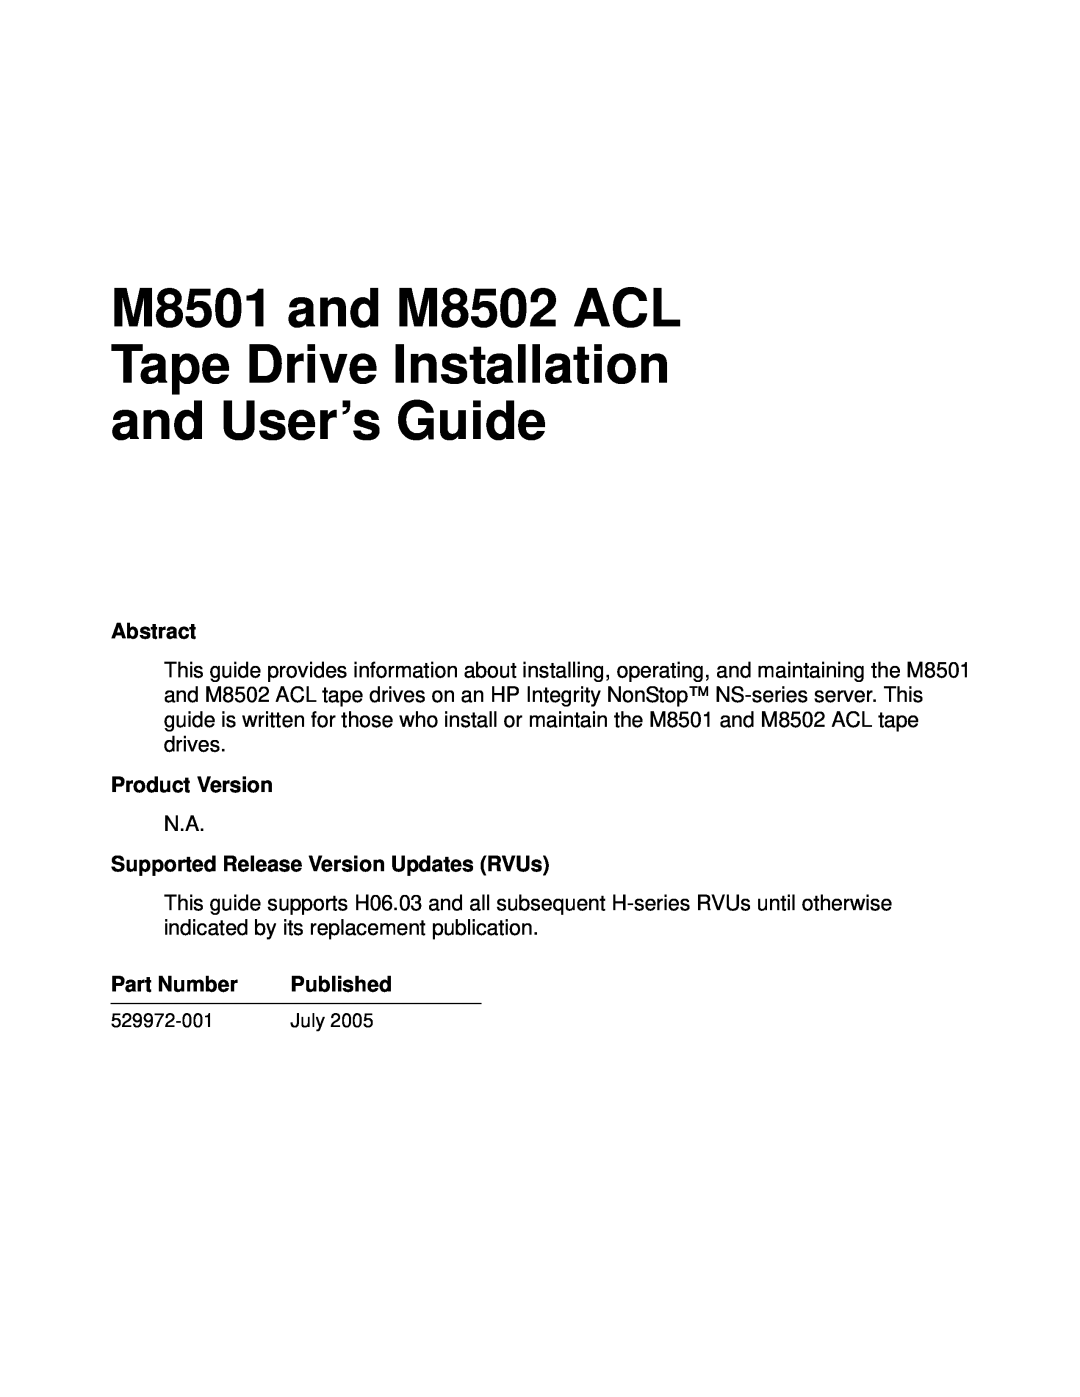 SMC Networks M8501 manual Abstract, Product Version, Supported Release Version Updates RVUs, Part Number, Published 